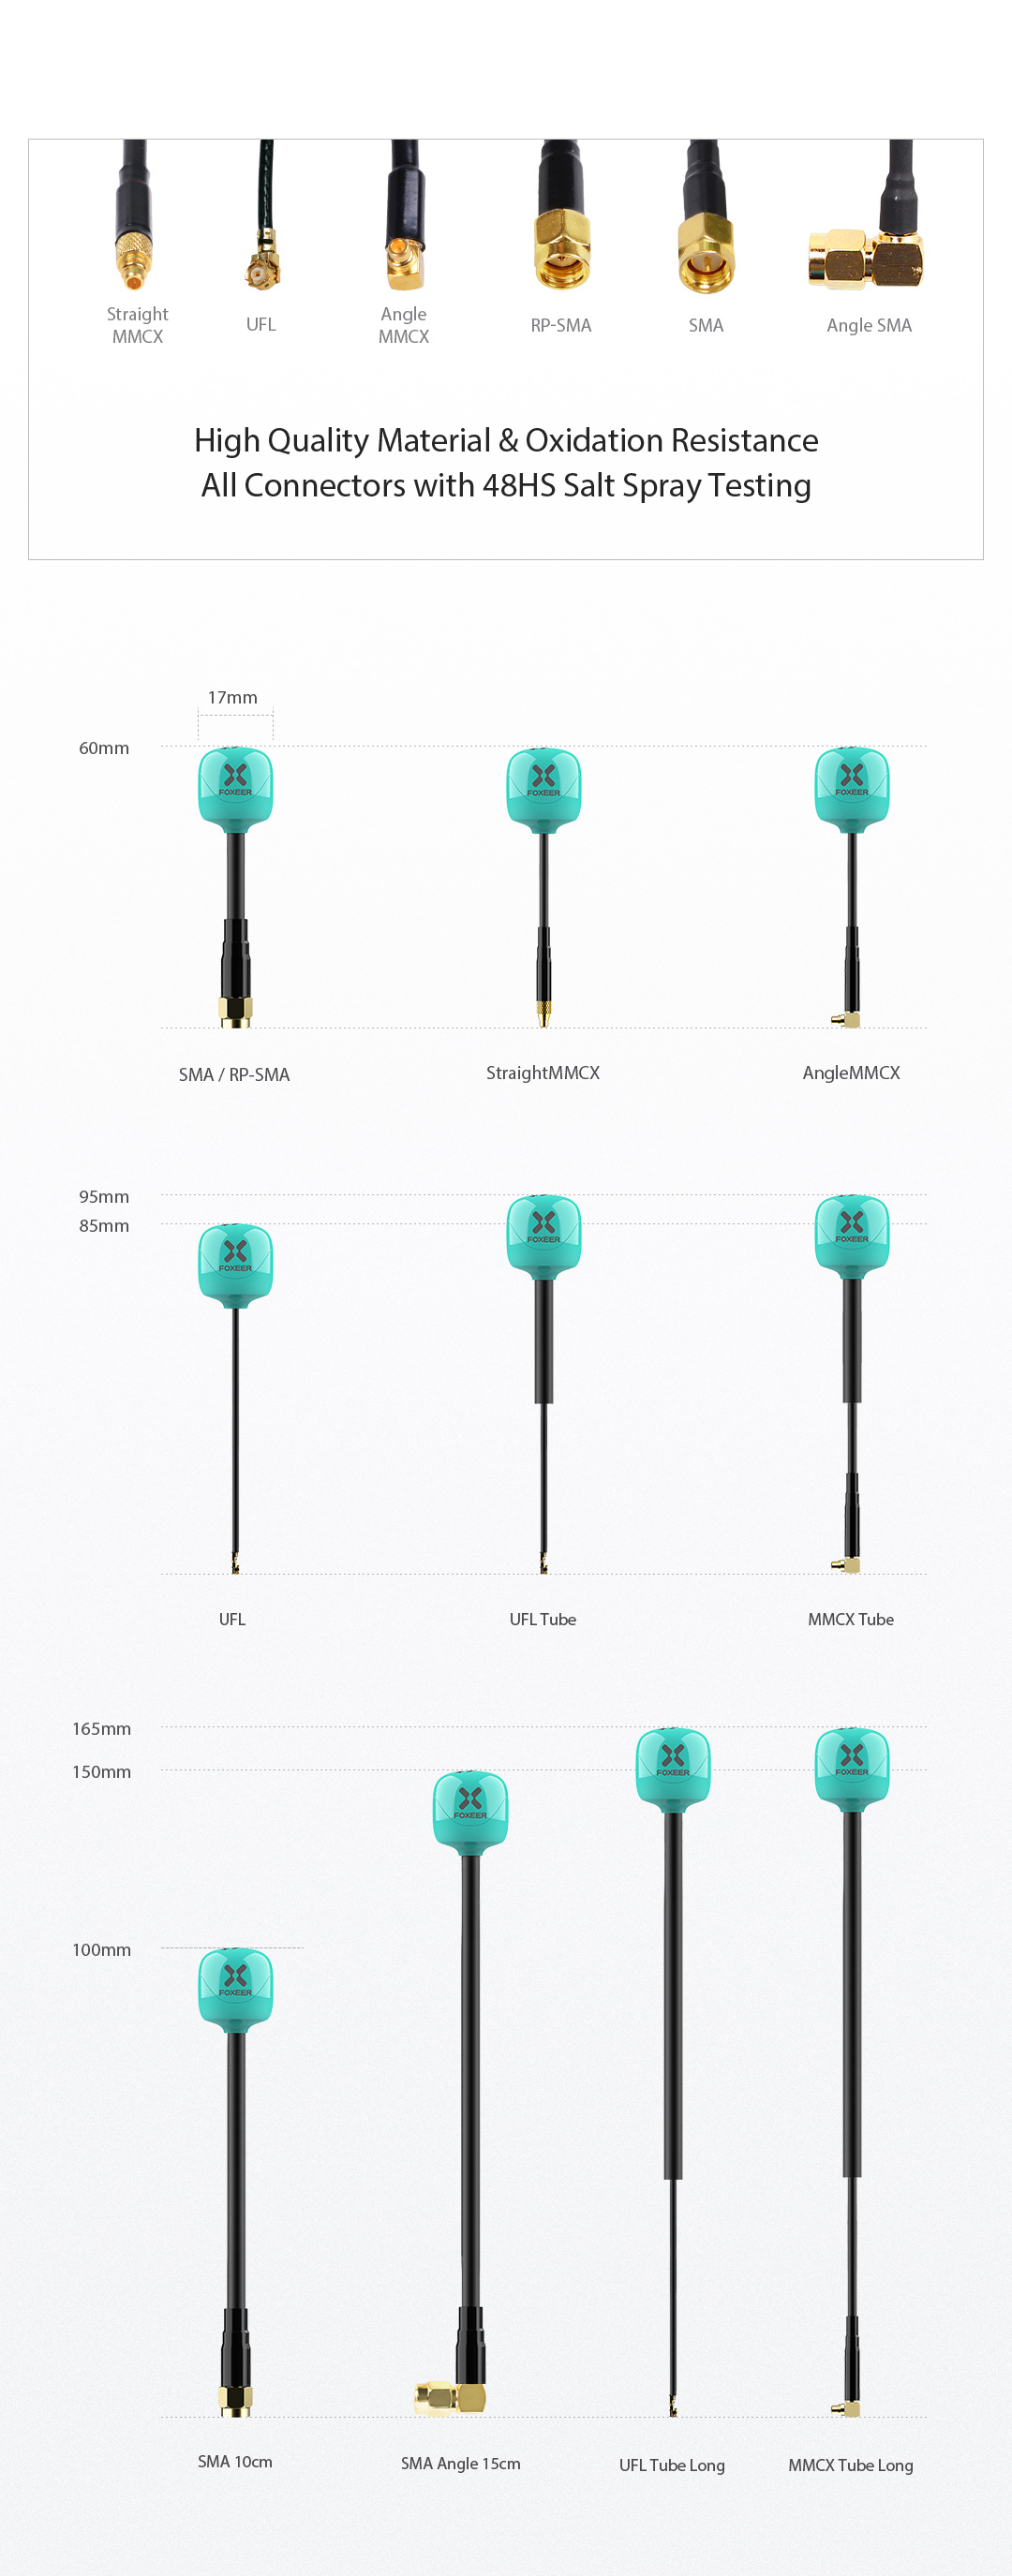 Foxeer Lollipop 4+ Super High Quality 5.8G Antenna 2 Pack (Pick Your Connector) 10 - Foxeer